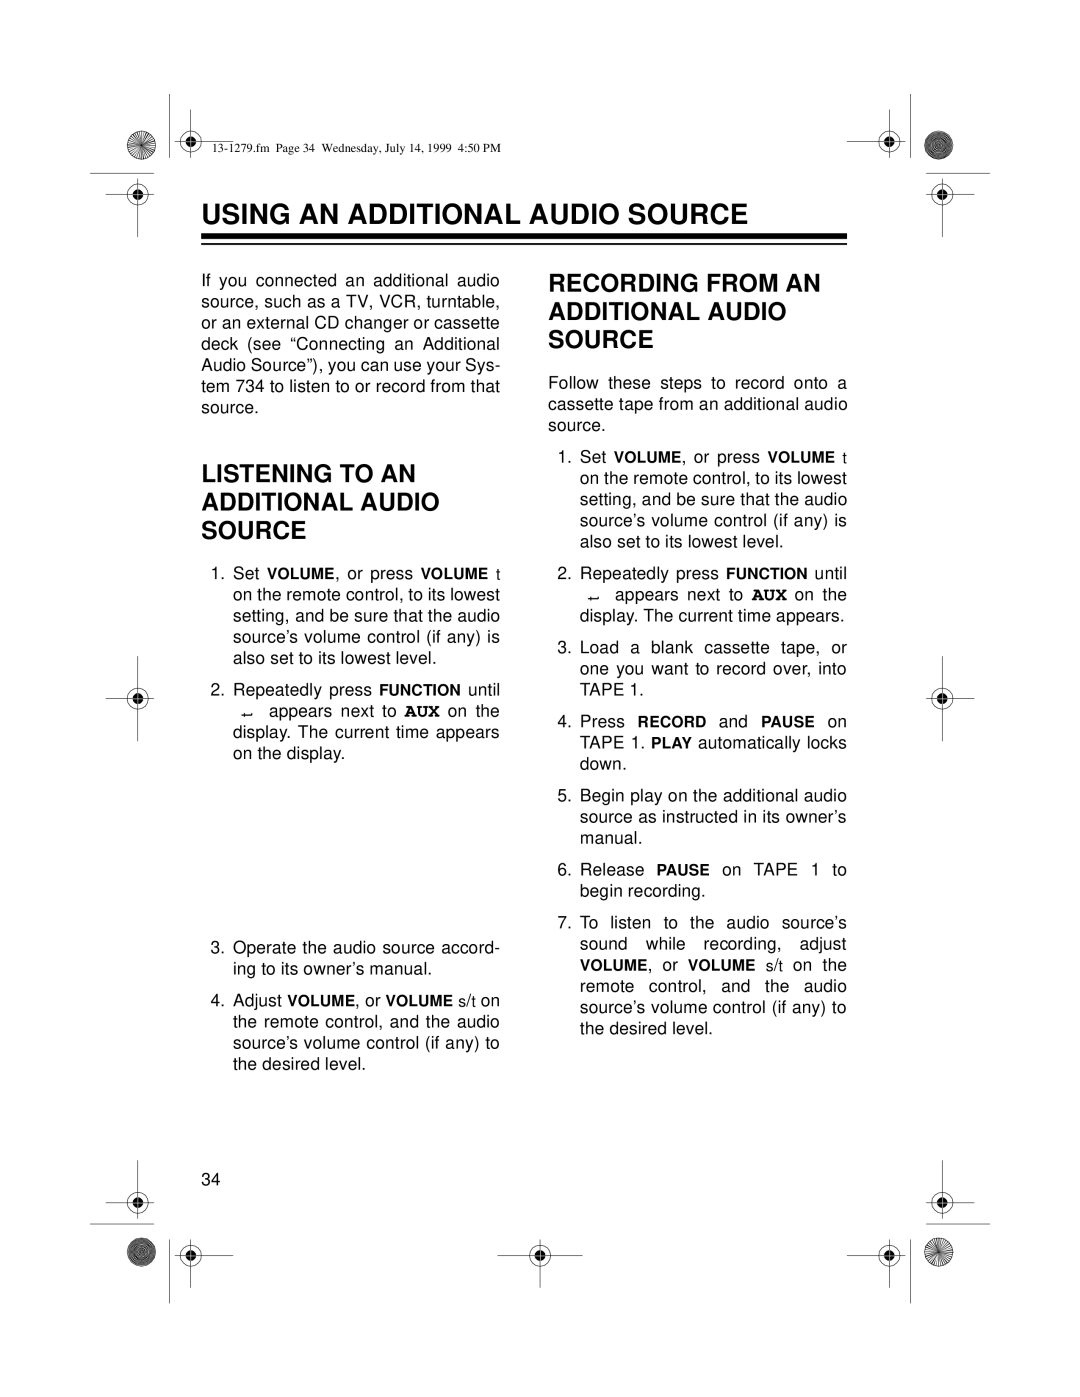 Optimus SYSTEM 734 owner manual Using An Additional Audio Source, Listening To An Additional Audio Source 